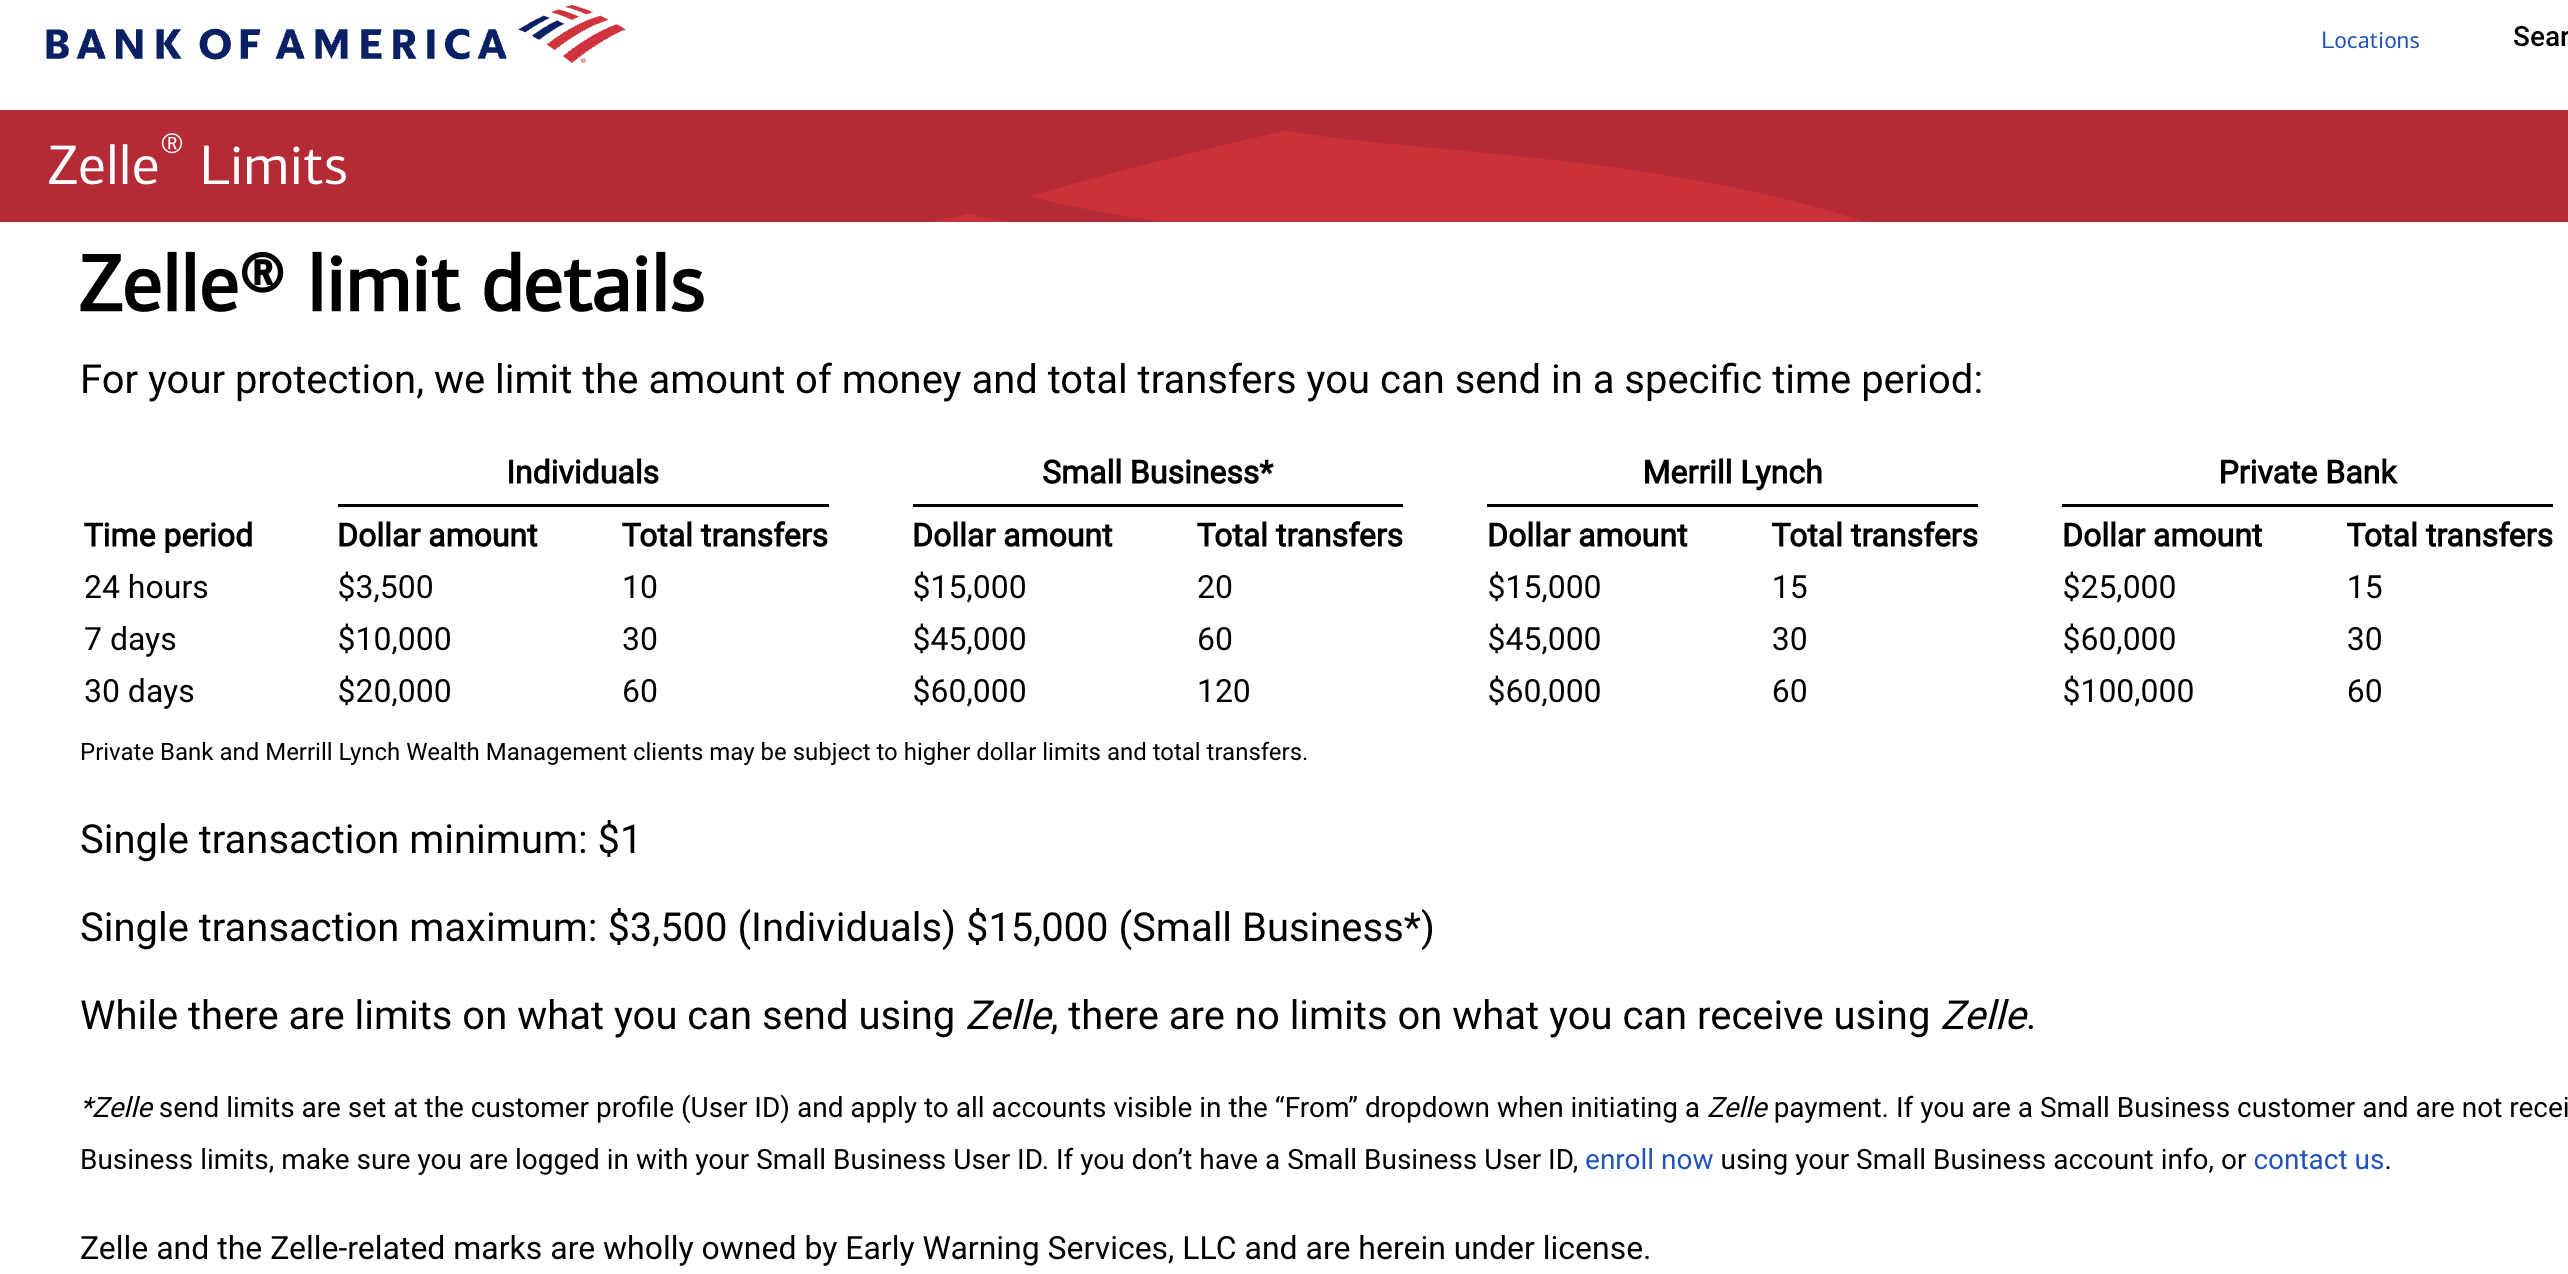 Zelle business accounts limits with Bank of America